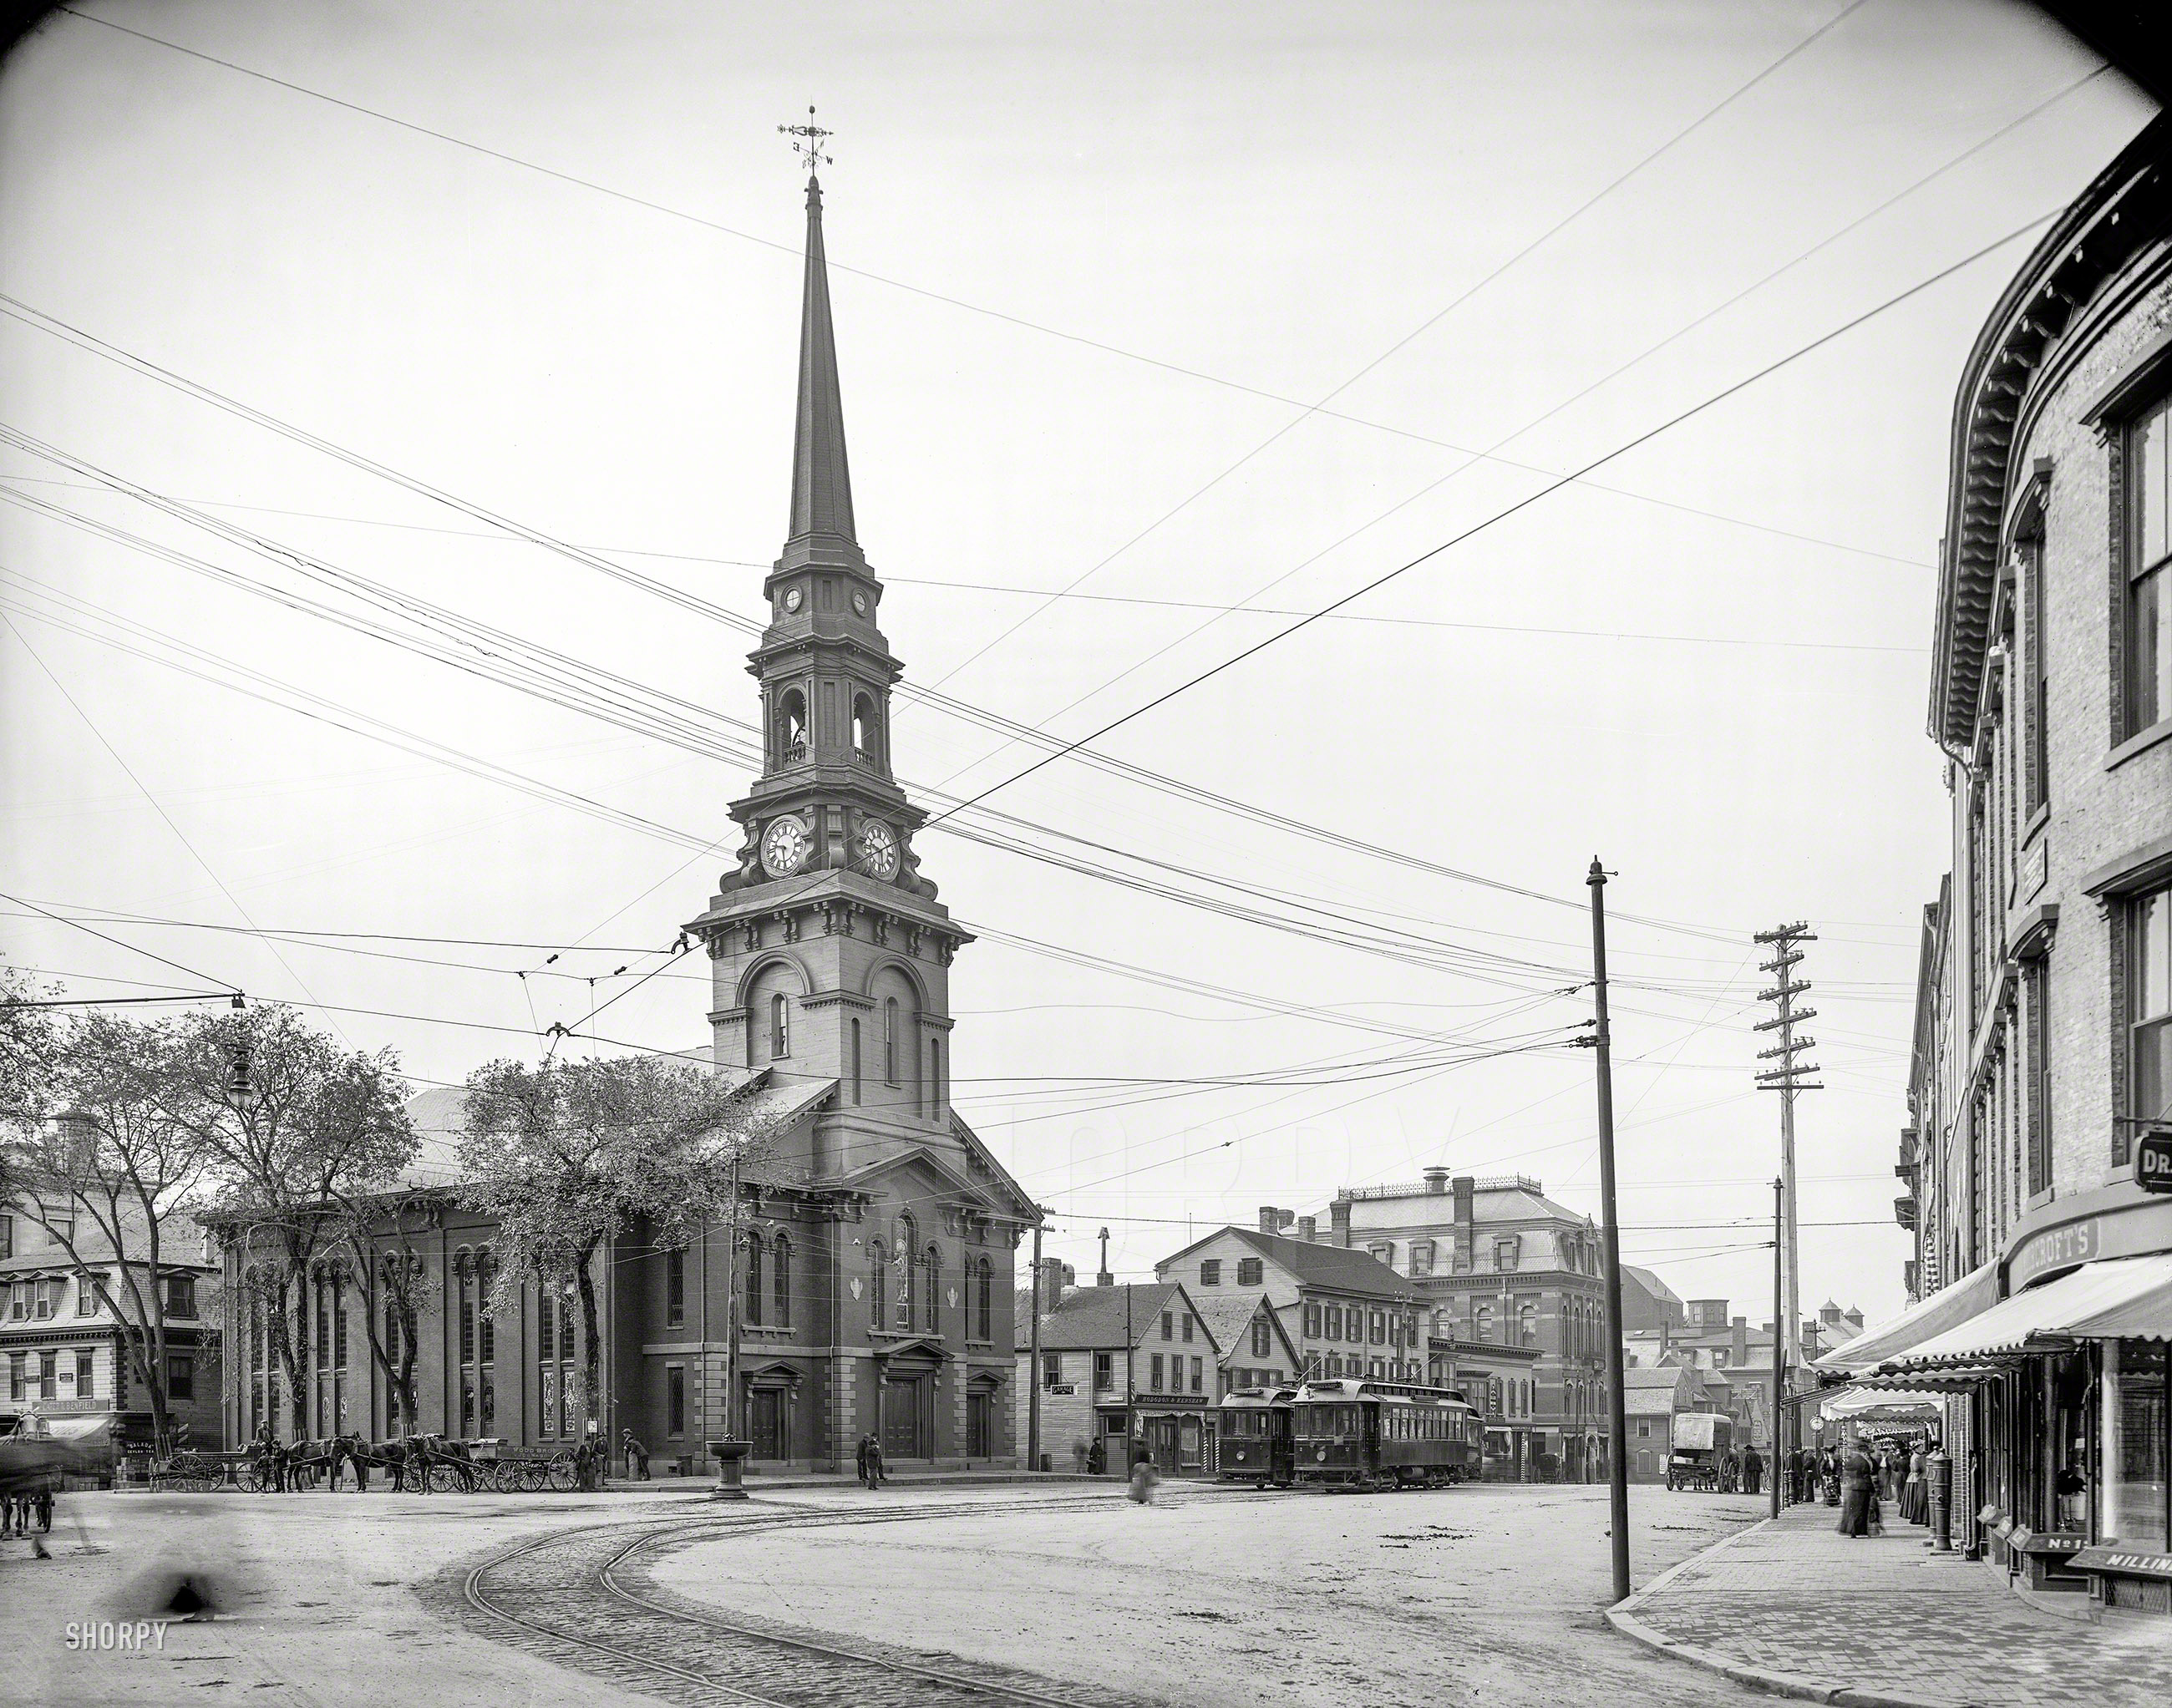 1907. "North Church and Congress Streets, Portsmouth, New Hampshire." 8x10 inch dry plate glass negative, Detroit Publishing Company. View full size.